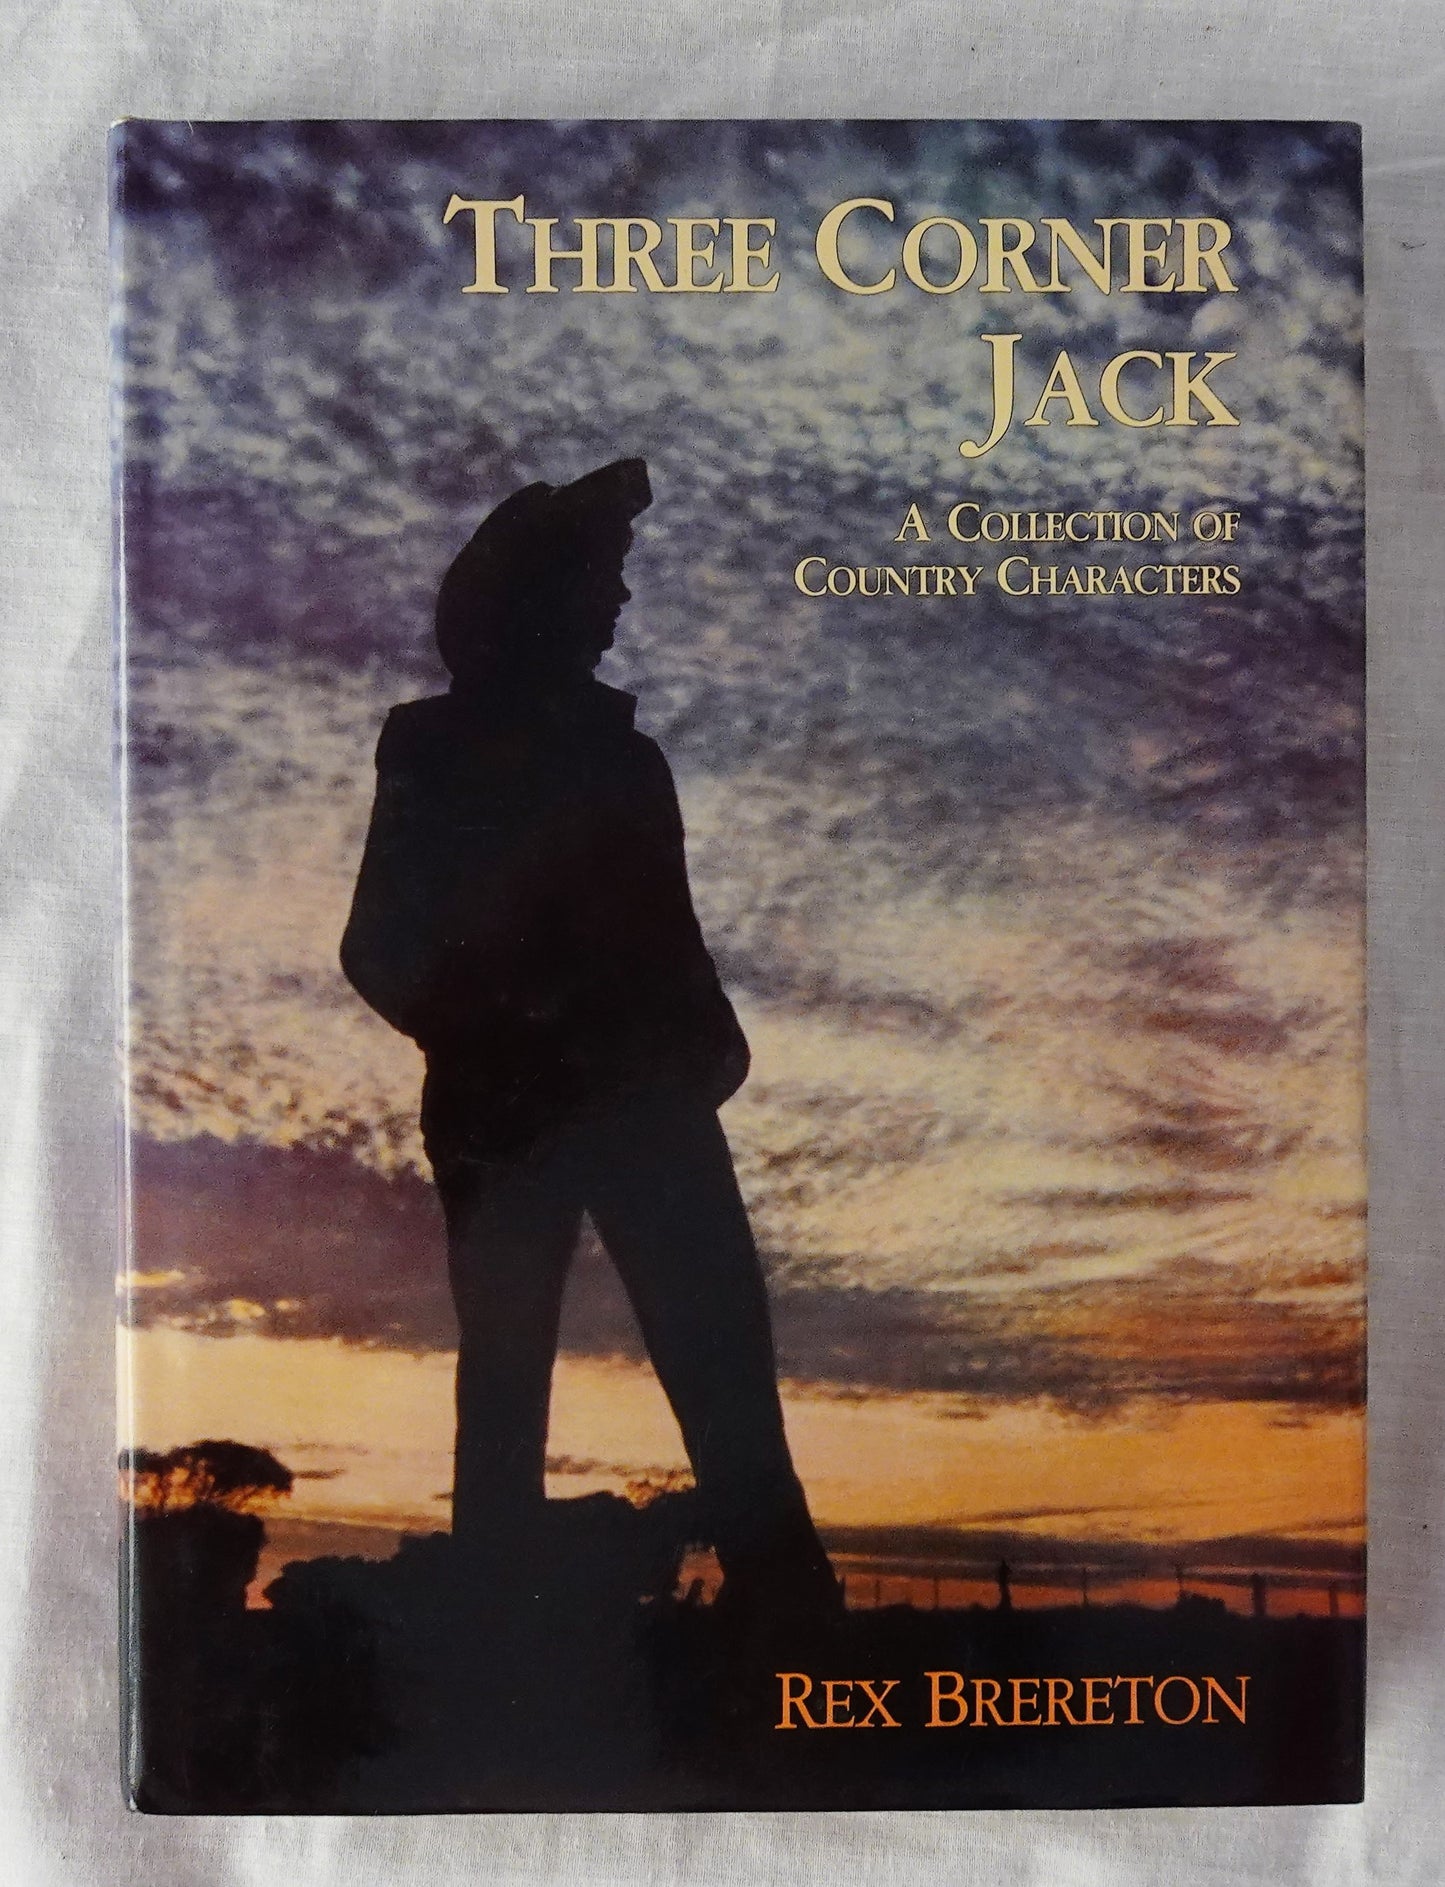 Three Corner Jack  A Collection of Country Characters  by Rex Brereton